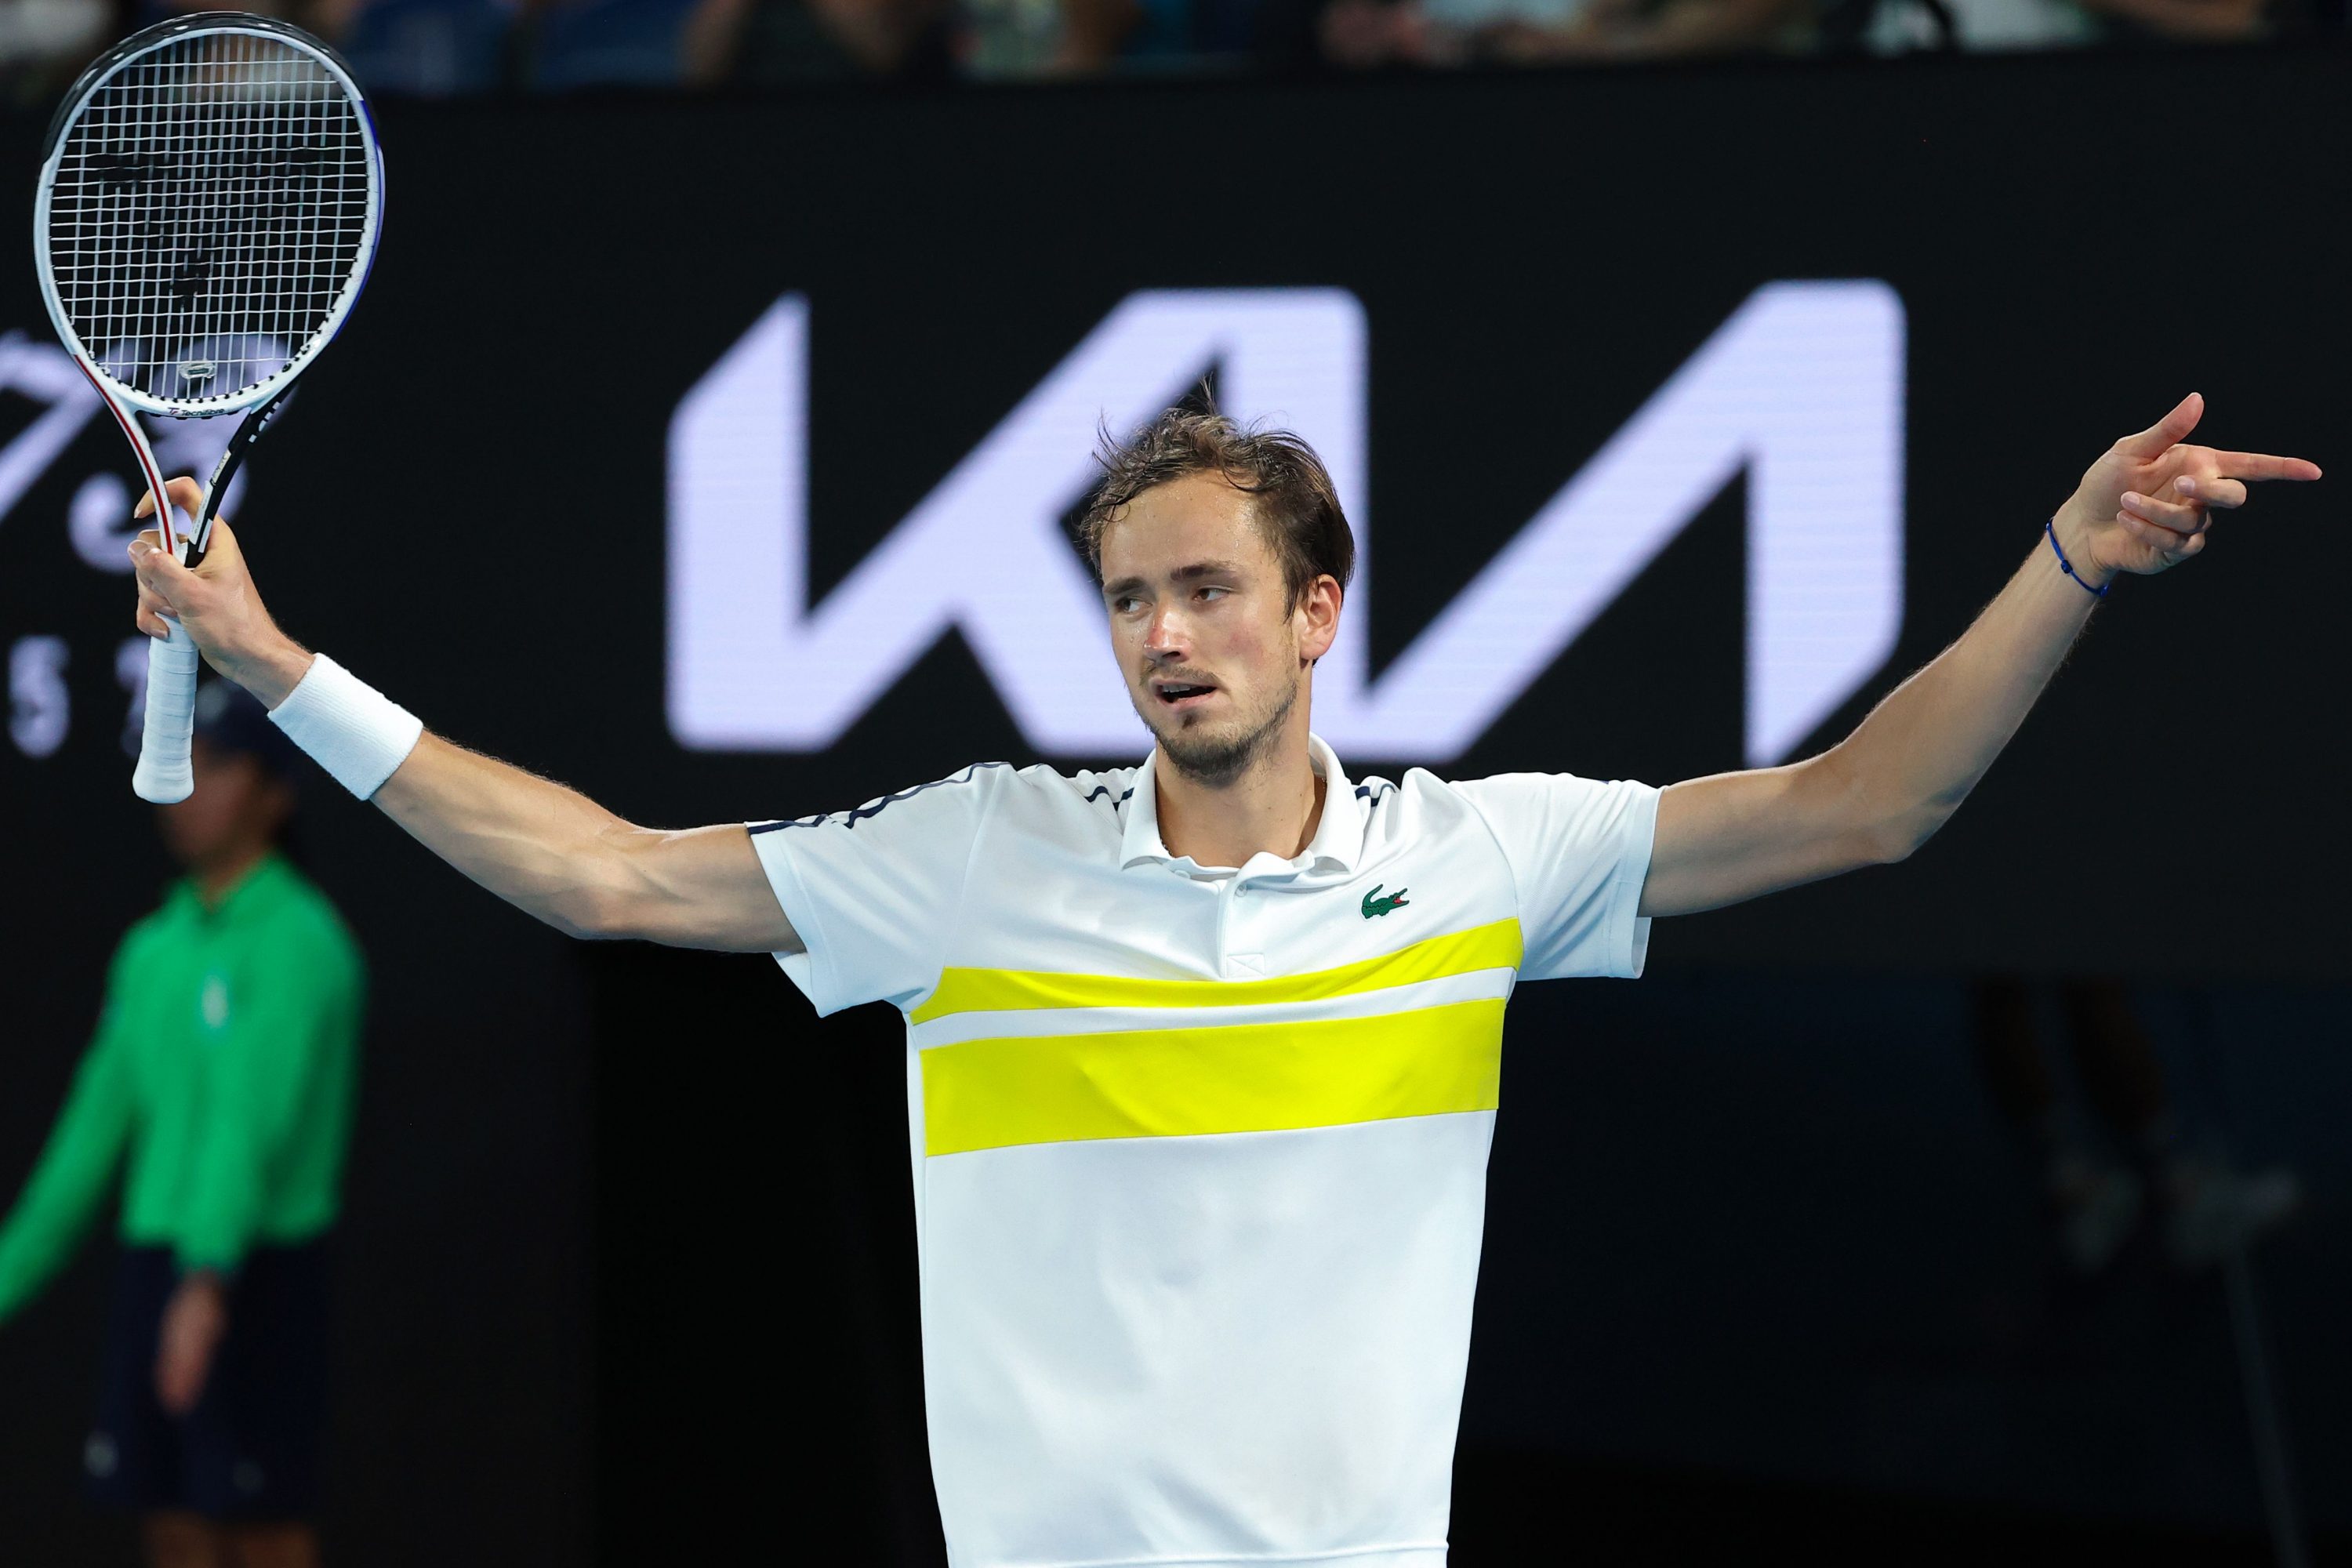 Russia's Daniil Medvedev reacts as he plays against Greece's Stefanos Tsitsipas during their men's singles semi-final match on day twelve of the Australian Open tennis tournament in Melbourne on February 19, 2021.